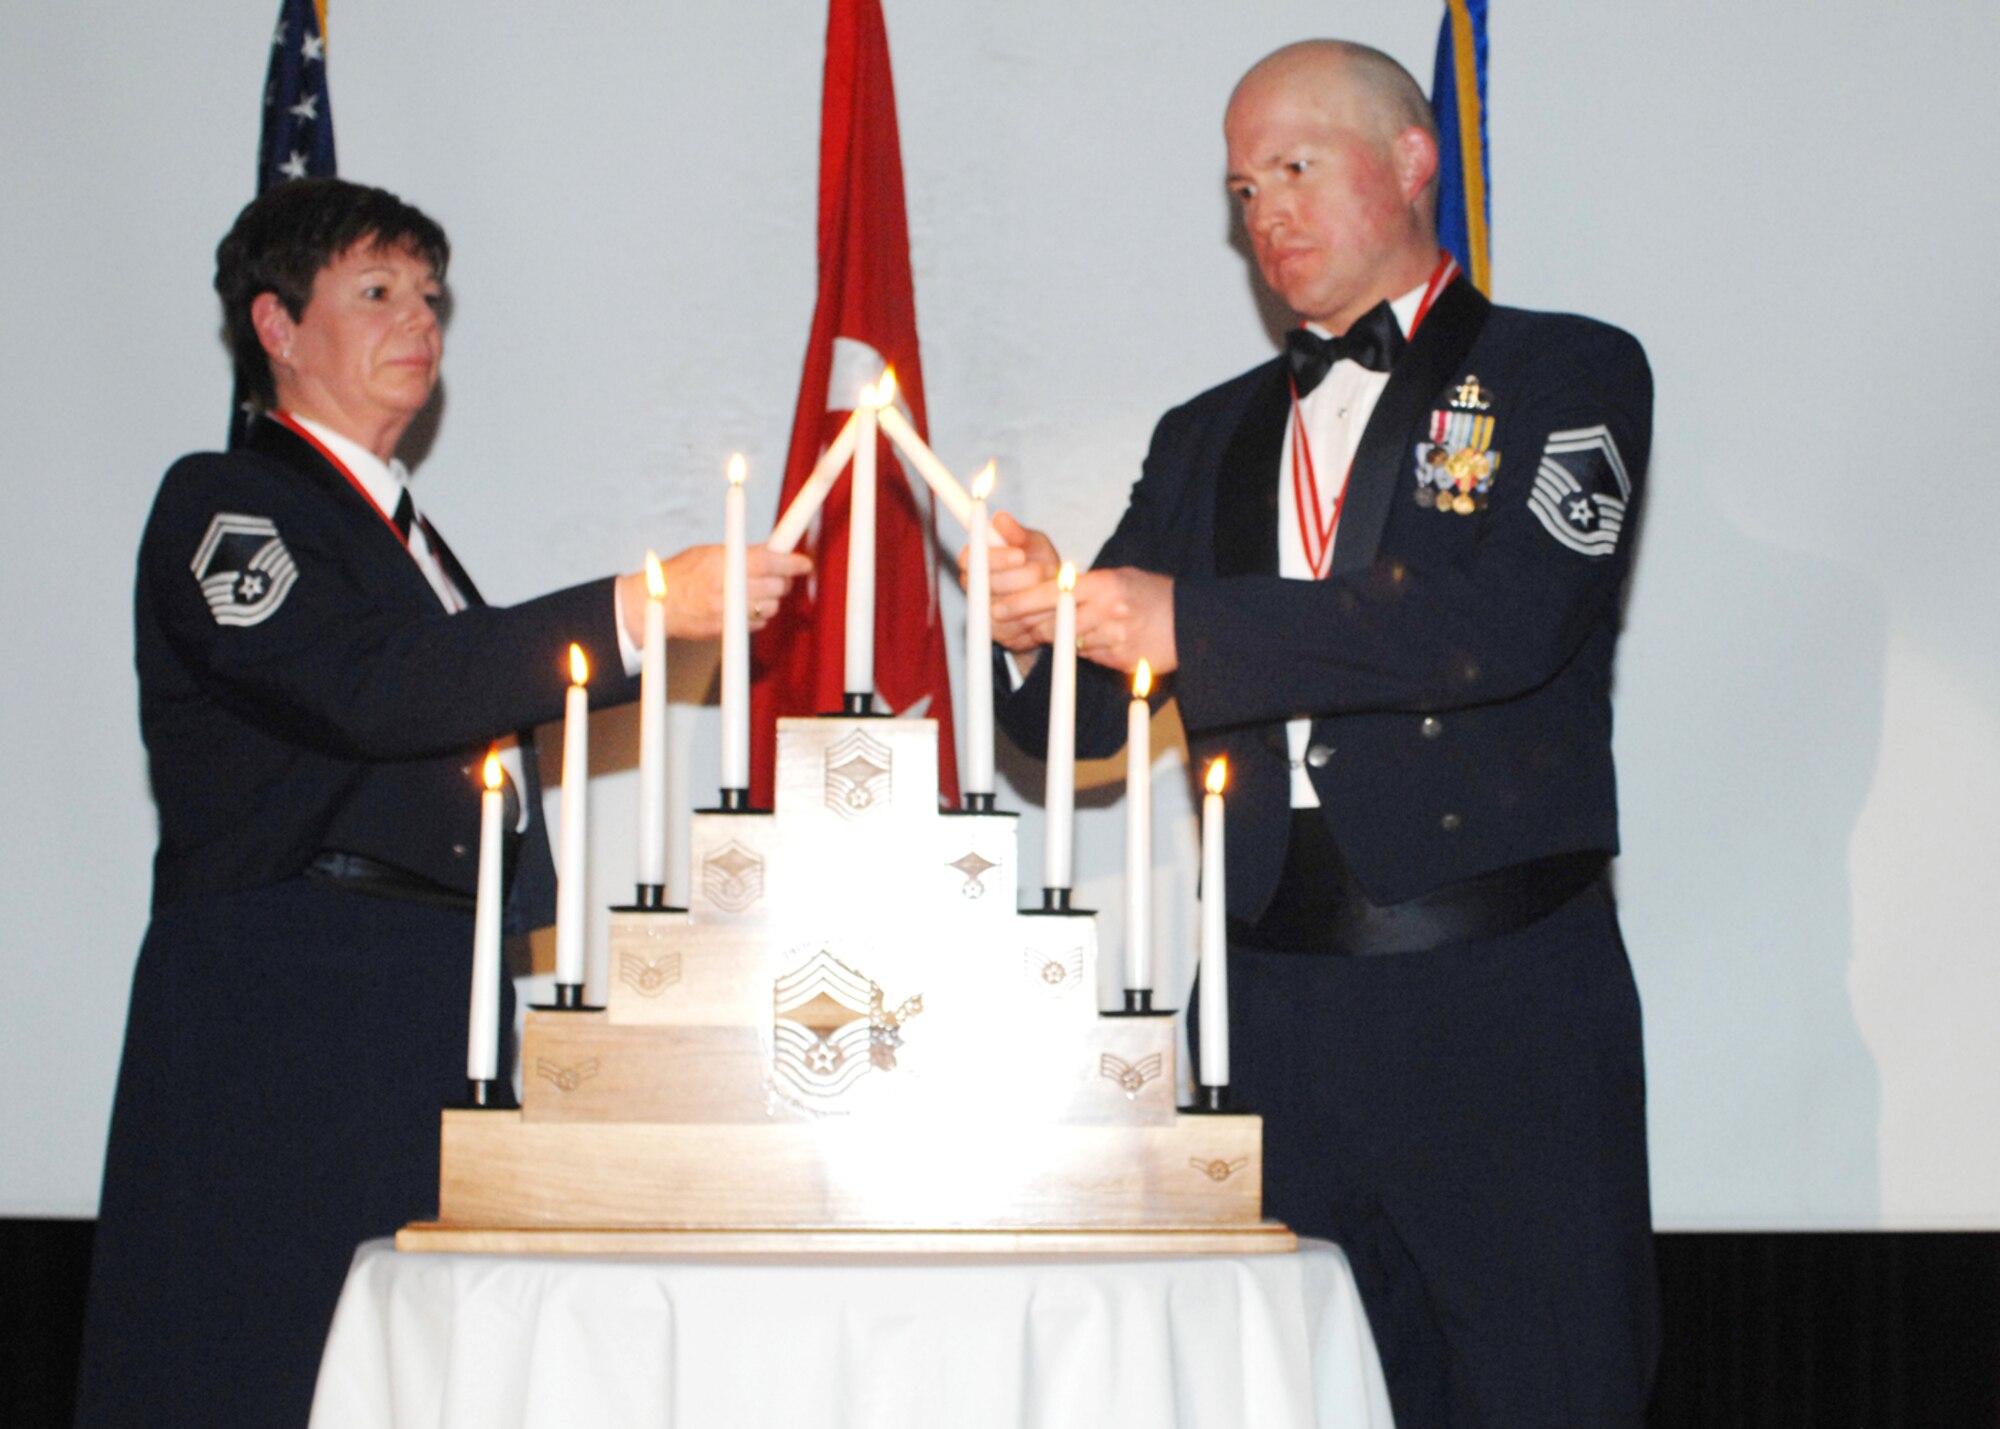 Senior Master Sgt. Denise Mikolajczyk (left) from the 39th Mission Support Squadron and Senior Master Sgt. Steven Lantz from the 39th Operations Squadron light the last progression of grades candles together during a Chief Induction Ceremony Feb. 9 at the Consolidated Club. (U. S. Air Force photo by Tech. Sgt. Shirley Henderson)